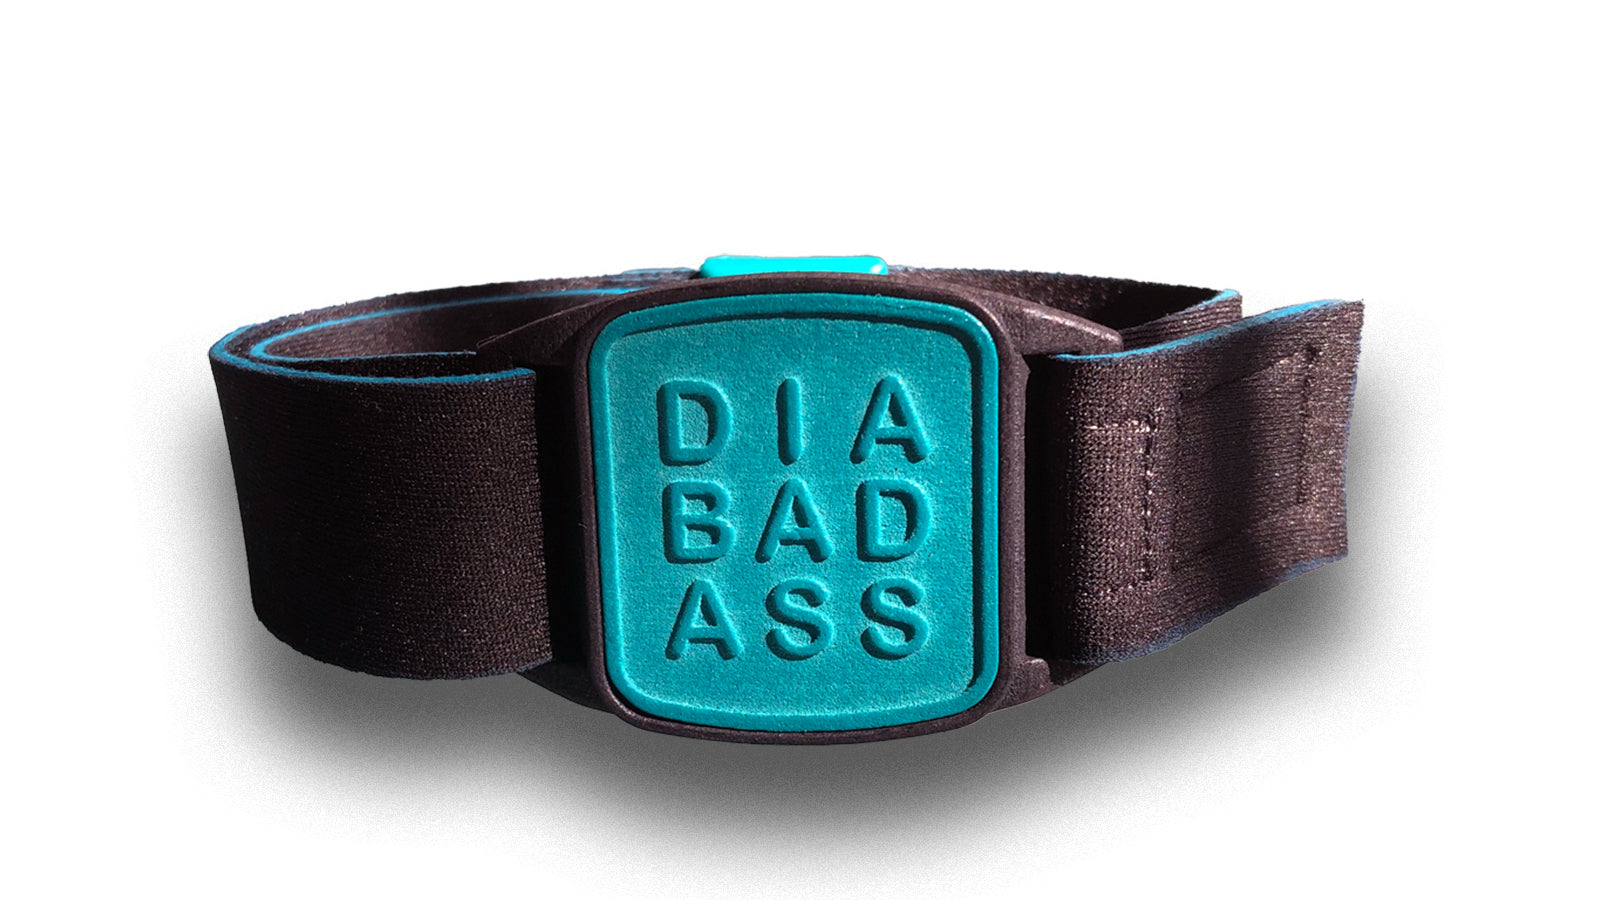 Dexband armband with black strap and teal DIABADASS cover.